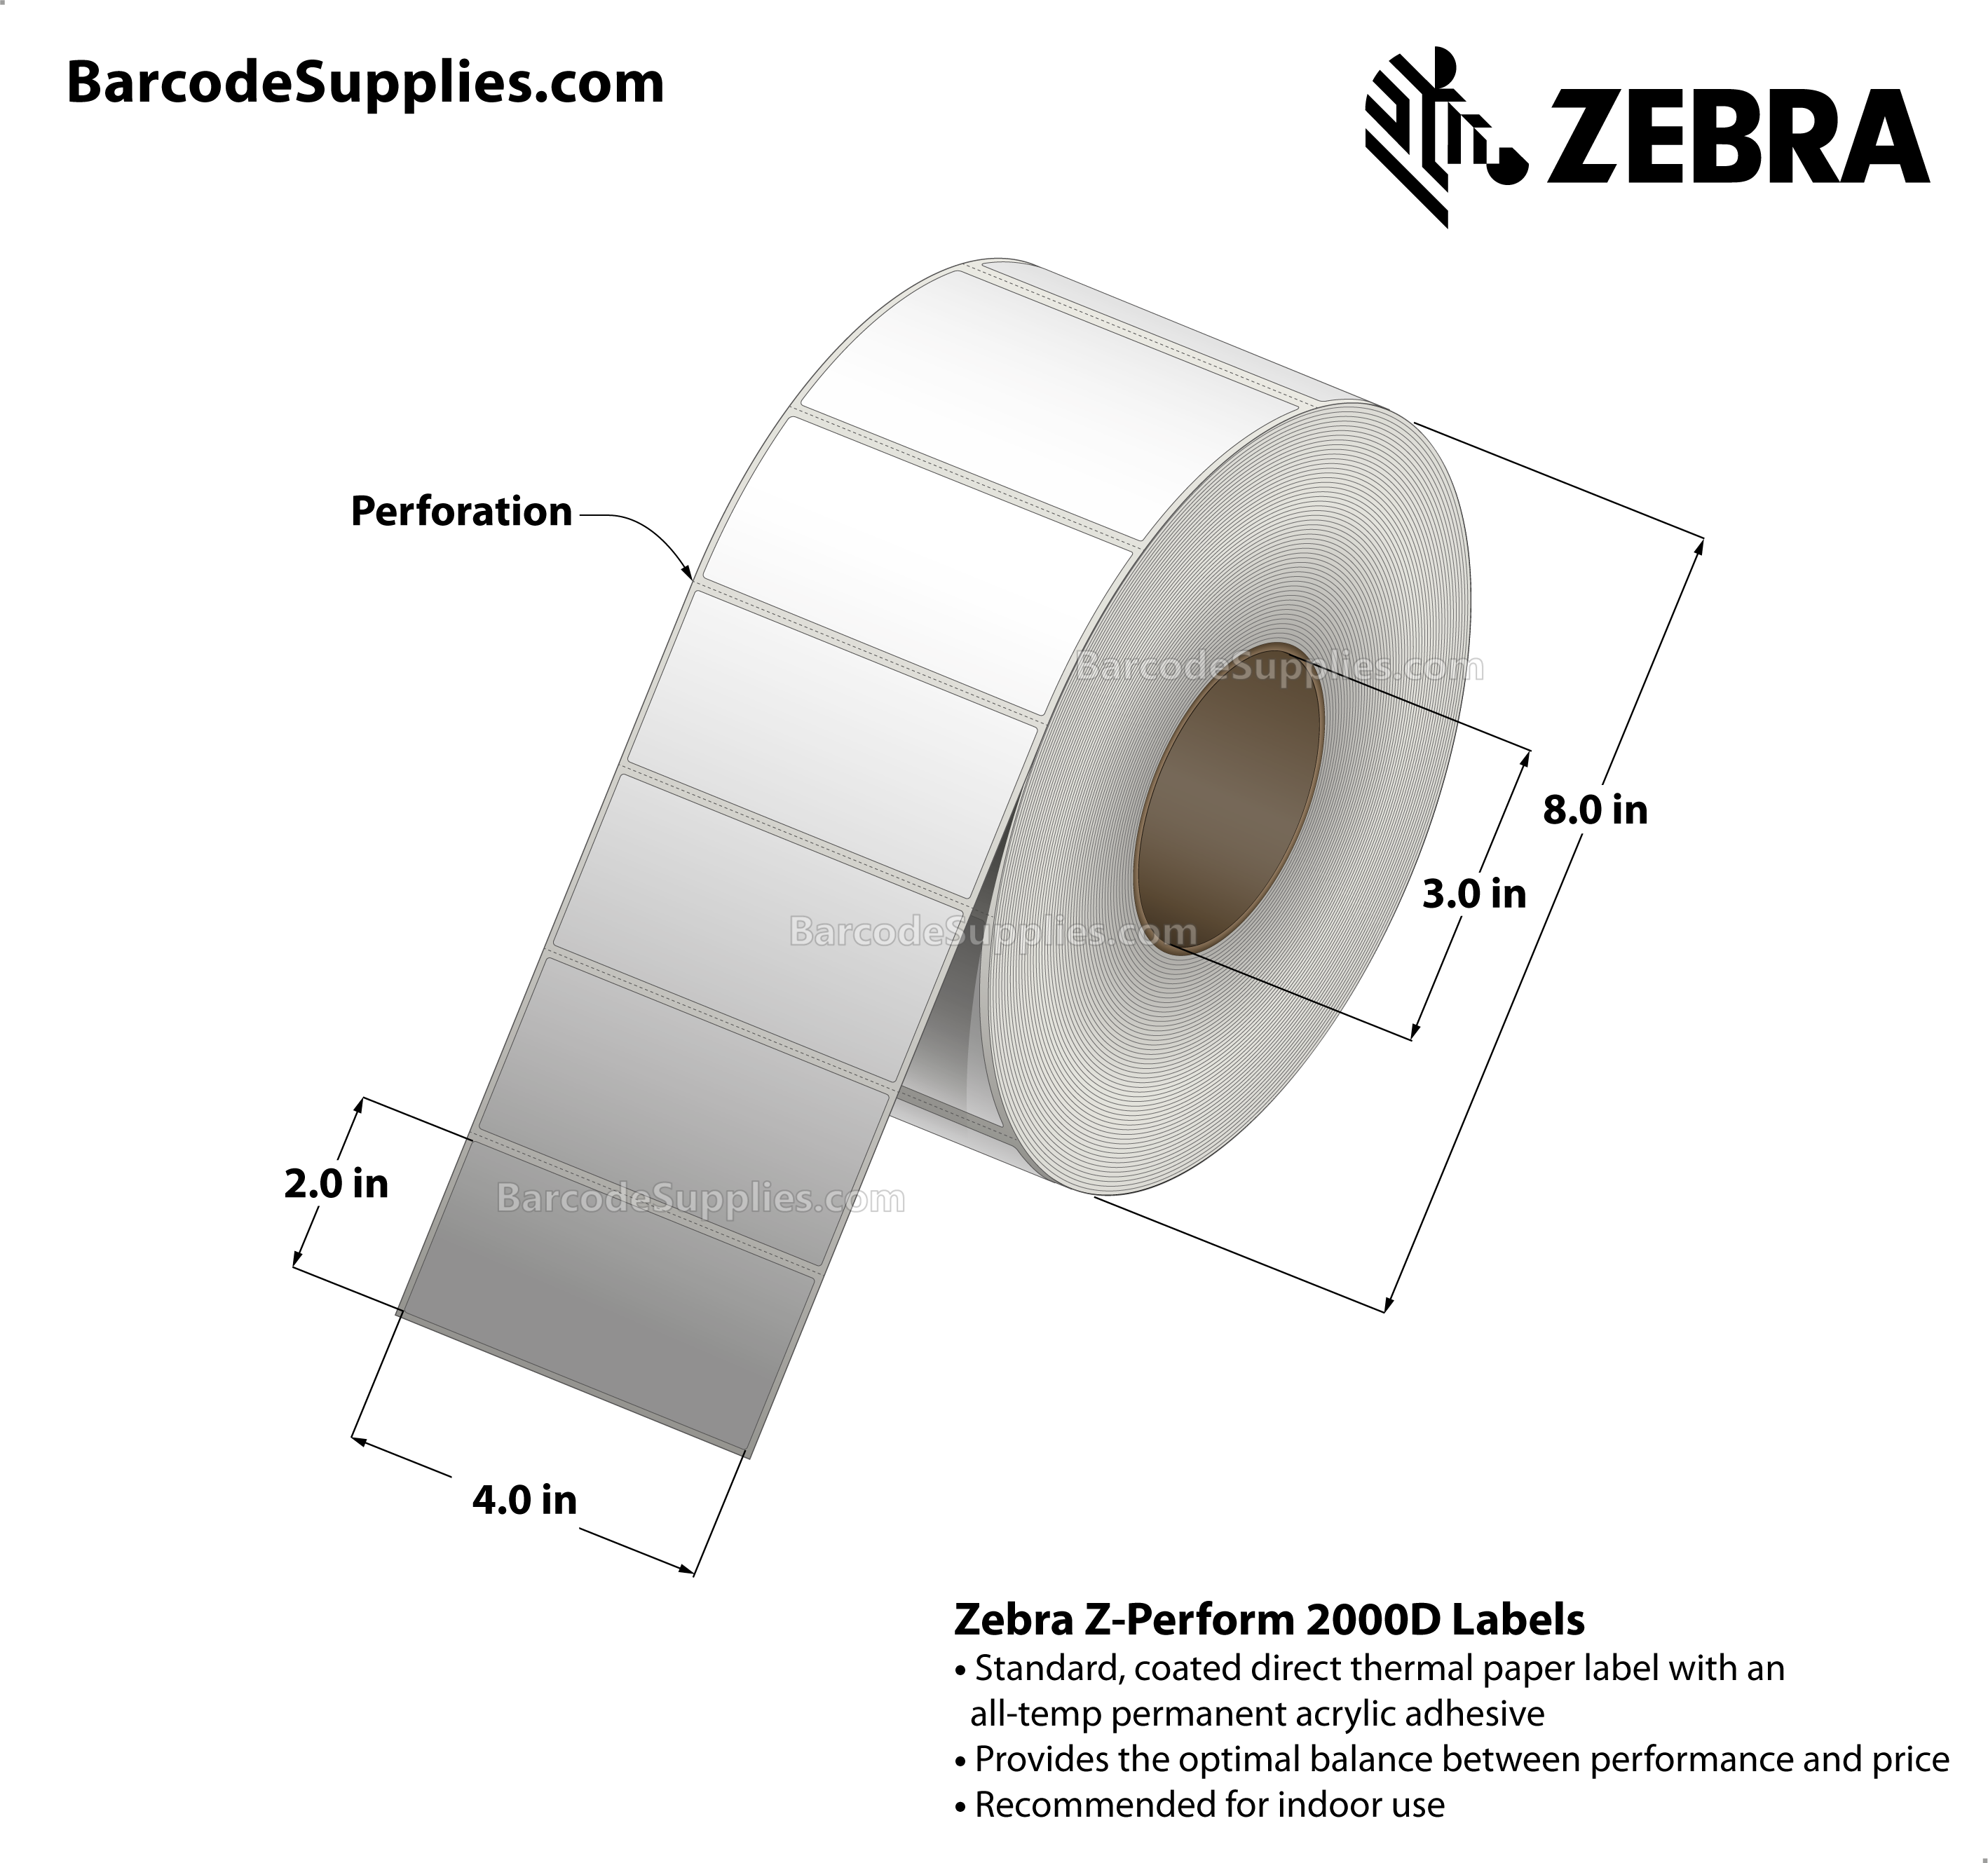 4 x 2 Direct Thermal White Z-Perform 2000D Labels With All-Temp Adhesive - Perforated - 2719 Labels Per Roll - Carton Of 4 Rolls - 10876 Labels Total - MPN: 10015365